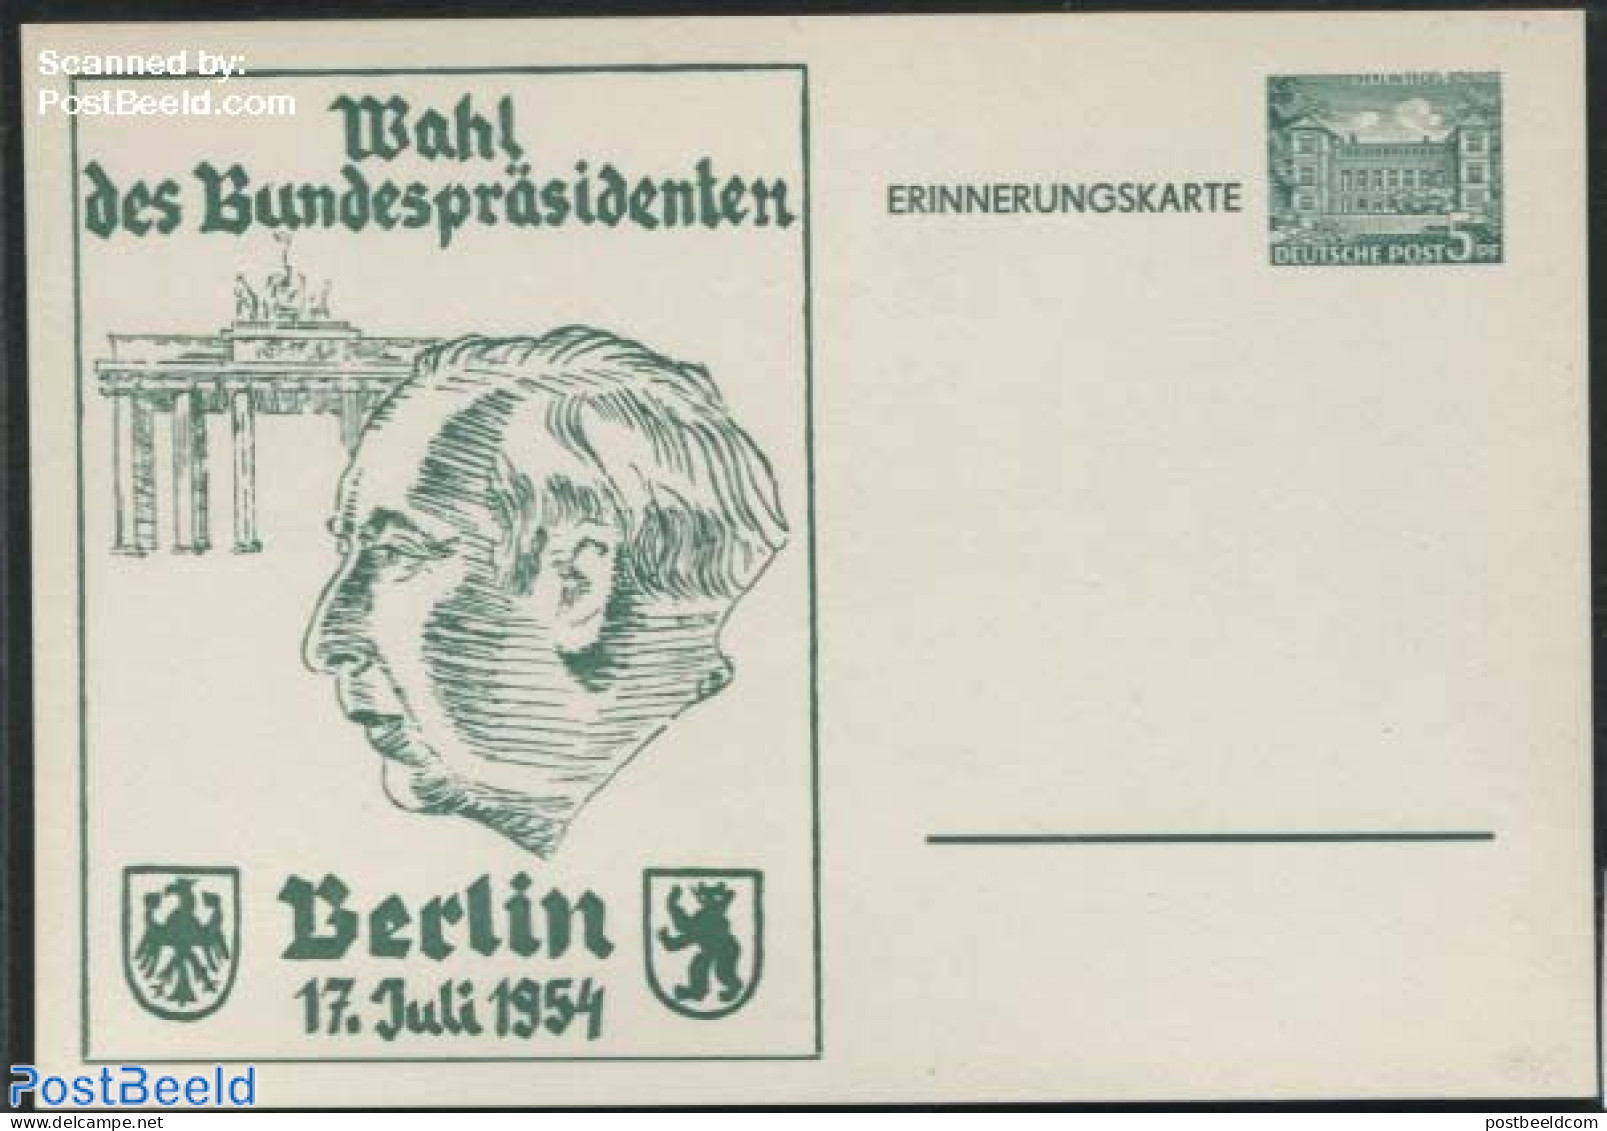 Germany, Berlin 1954 Postcard 5pf, Presidential Elections, Unused Postal Stationary - Lettres & Documents